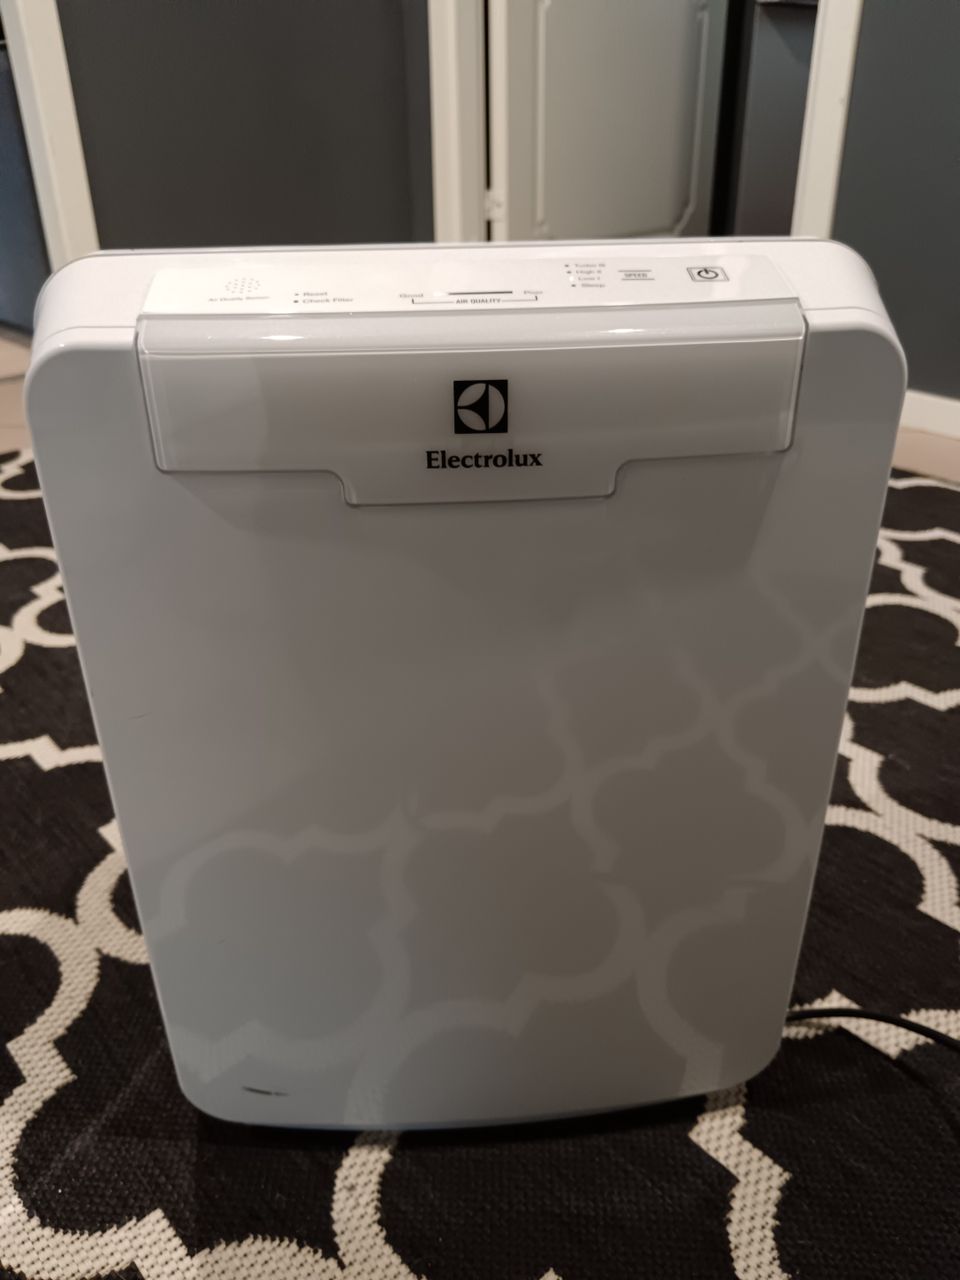 Electrolux air cleaner